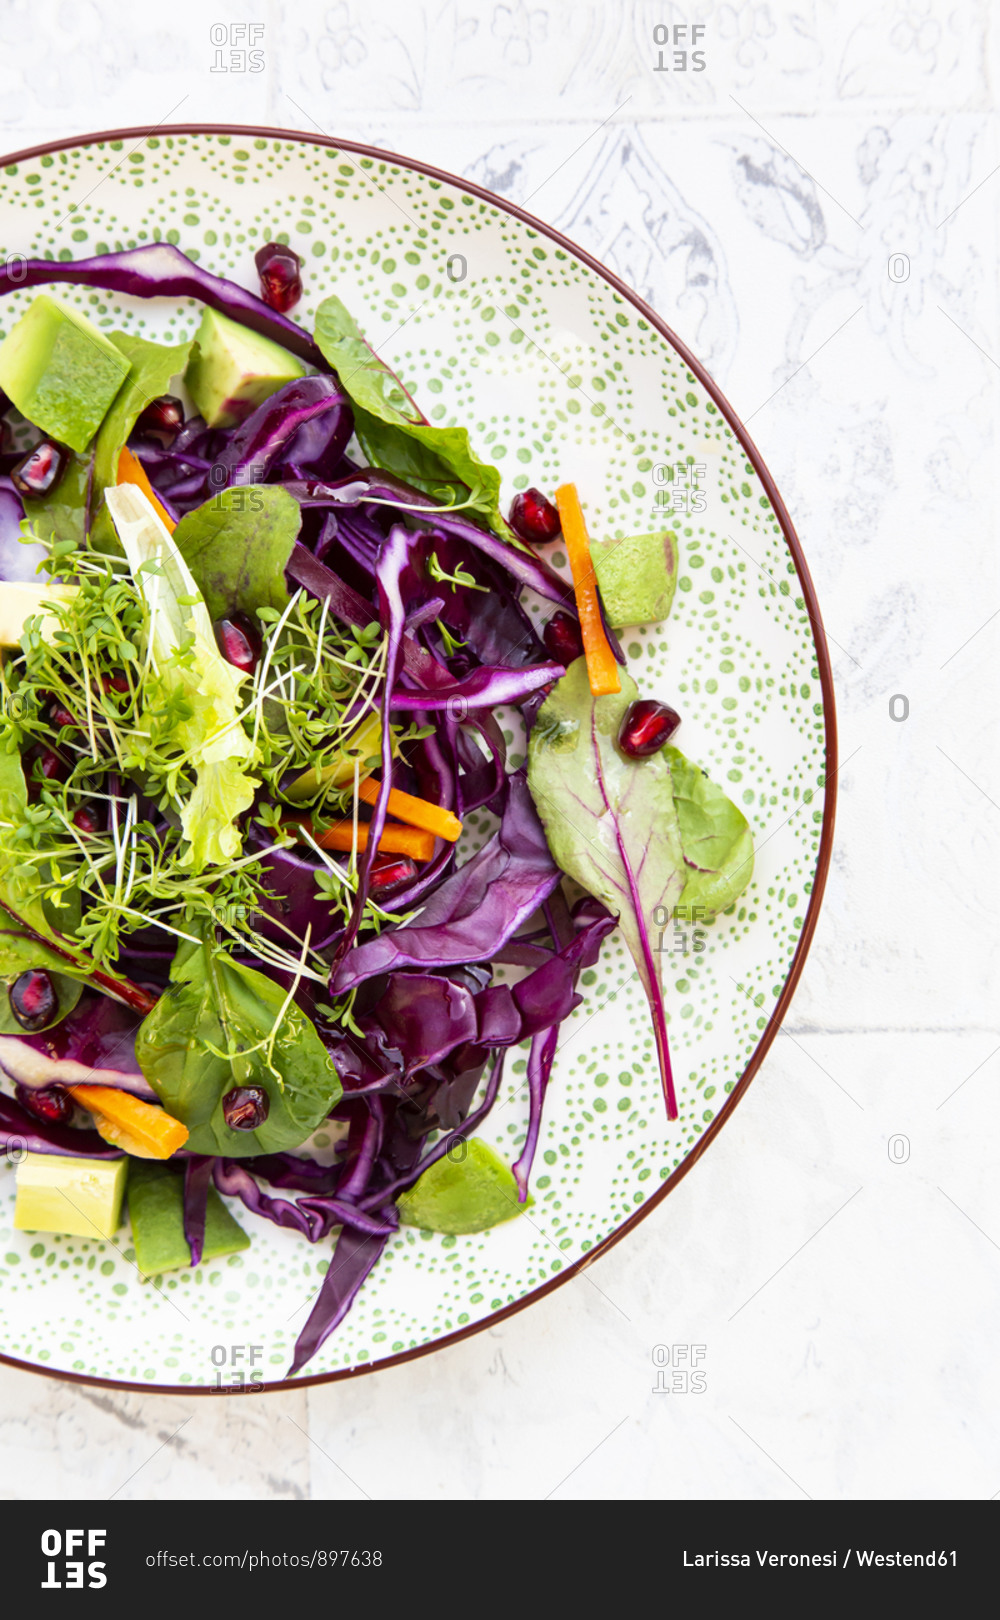 Salad with red cabbage- carrots- lettuce leaves- avocado- pomegranate seeds and cress